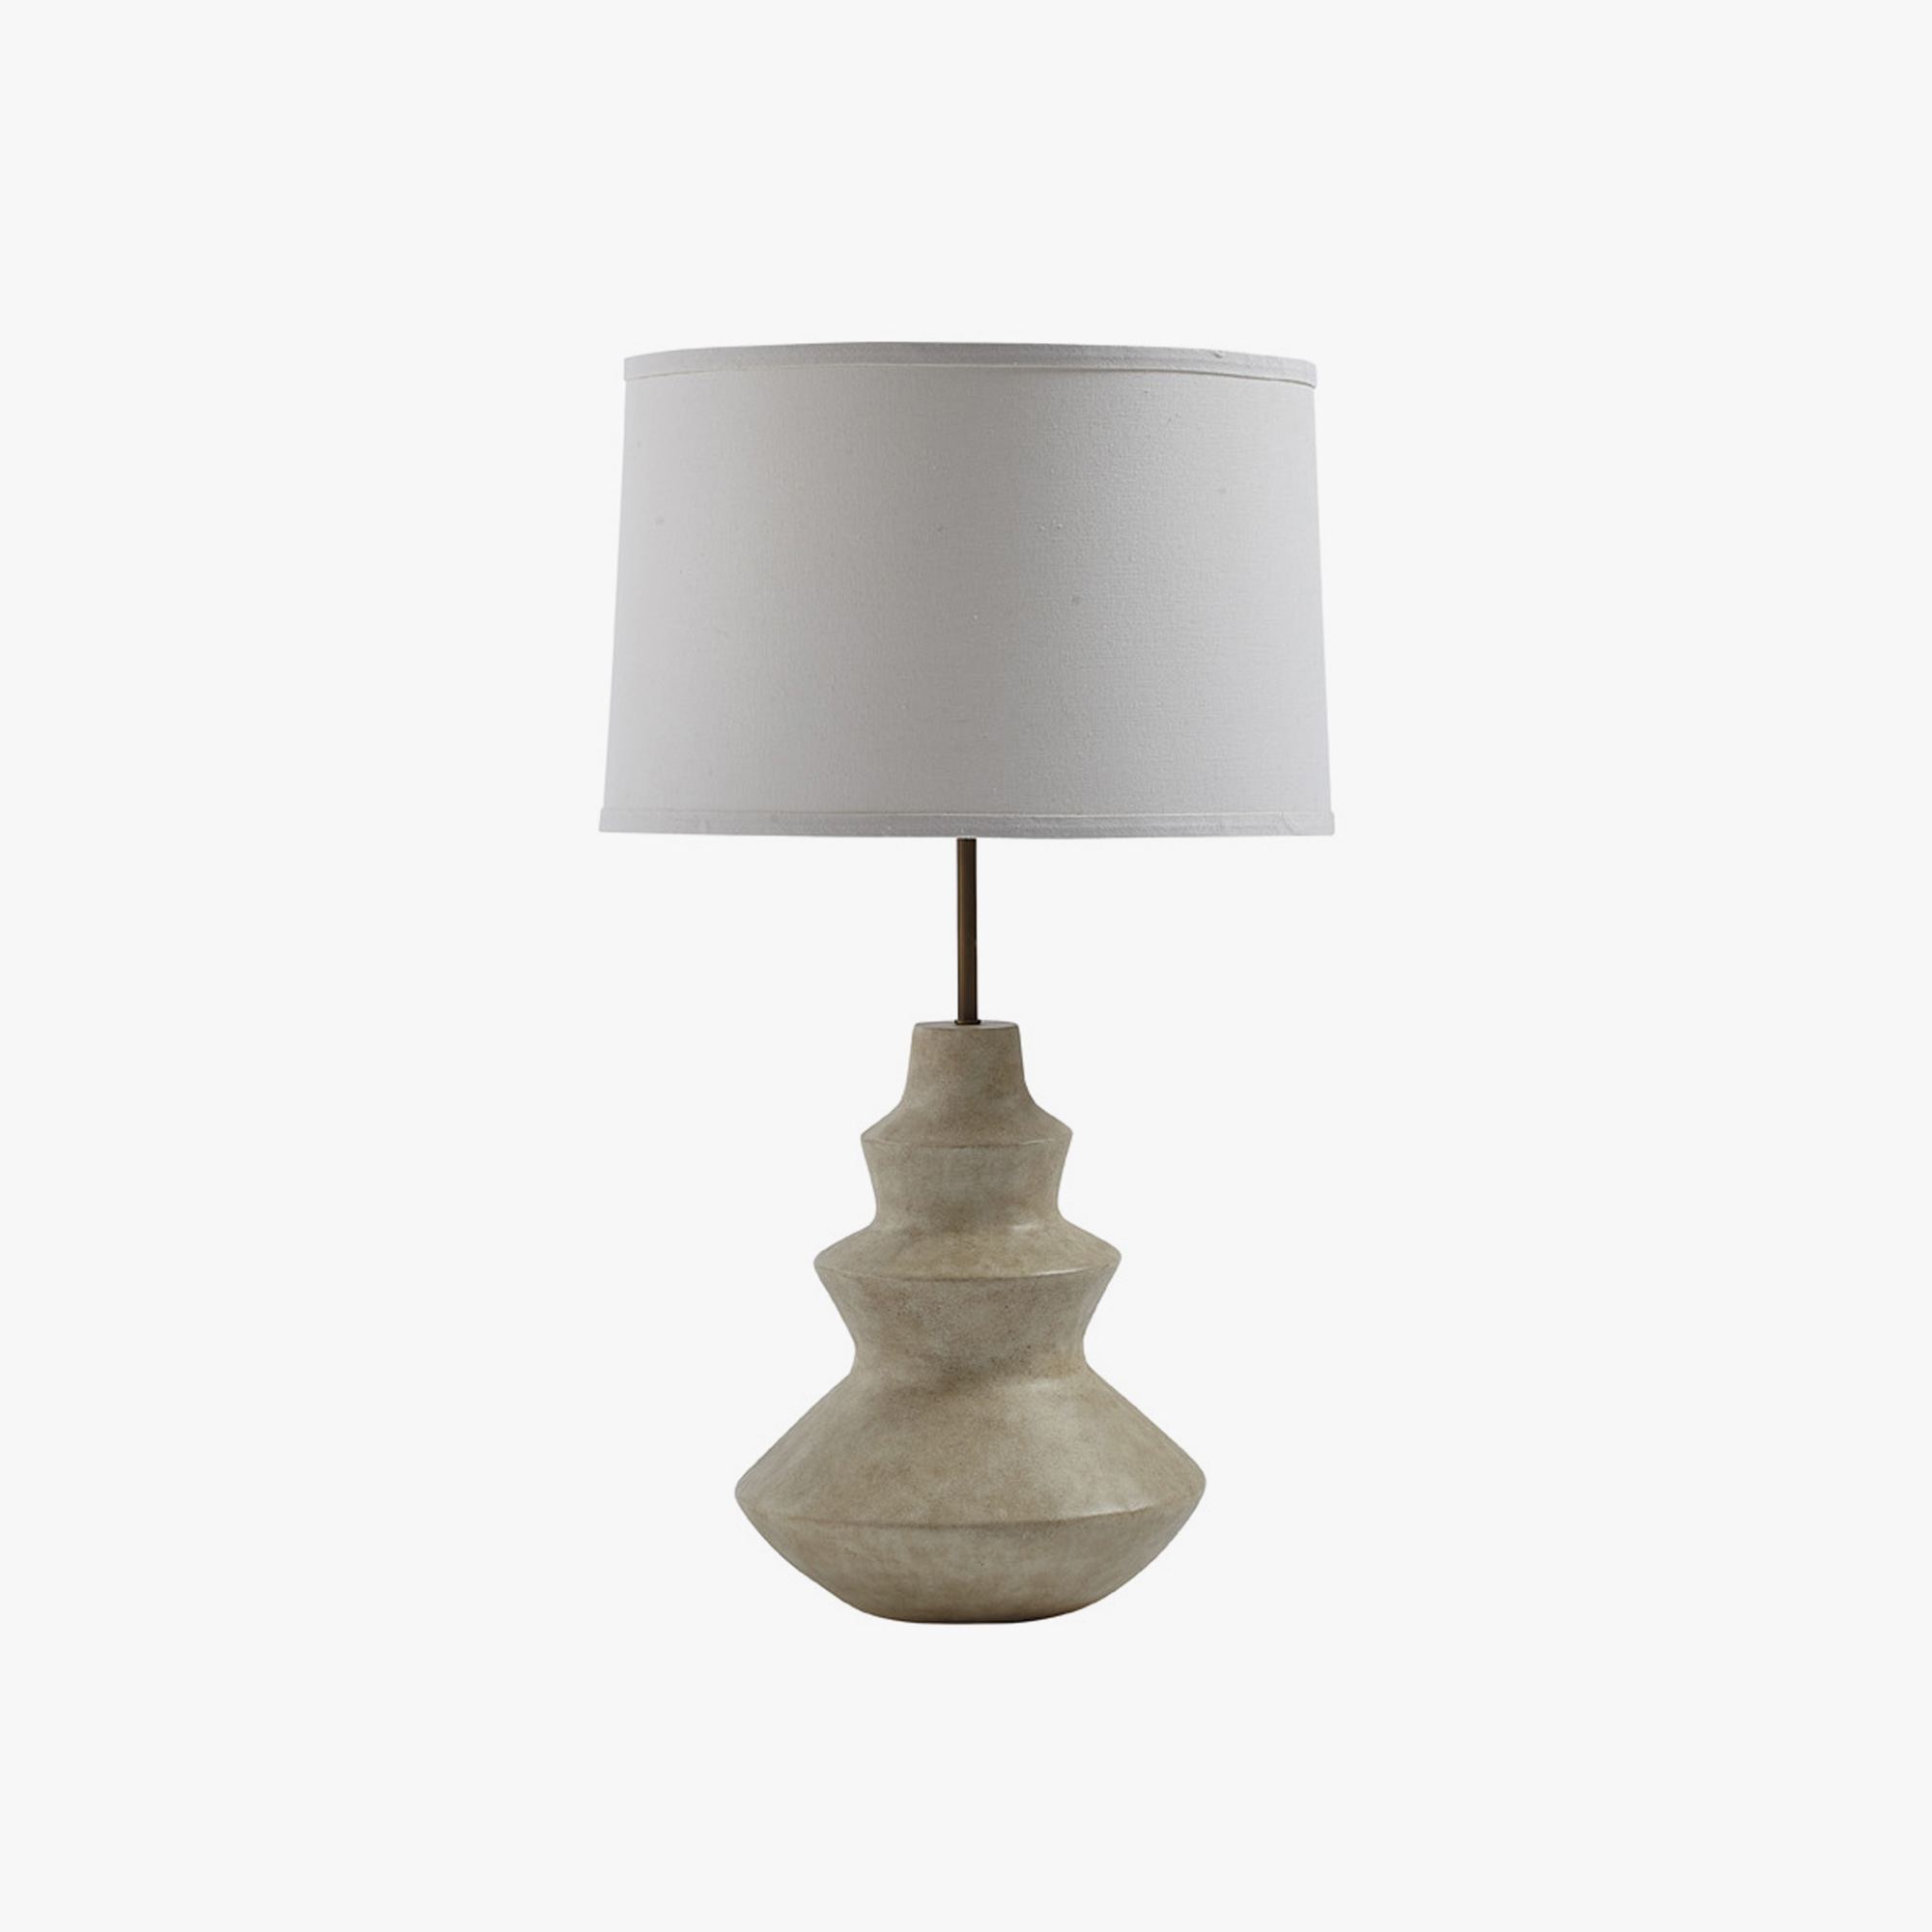 CIRCUS TABLE LAMP by Julian Chichester | South Hill Home